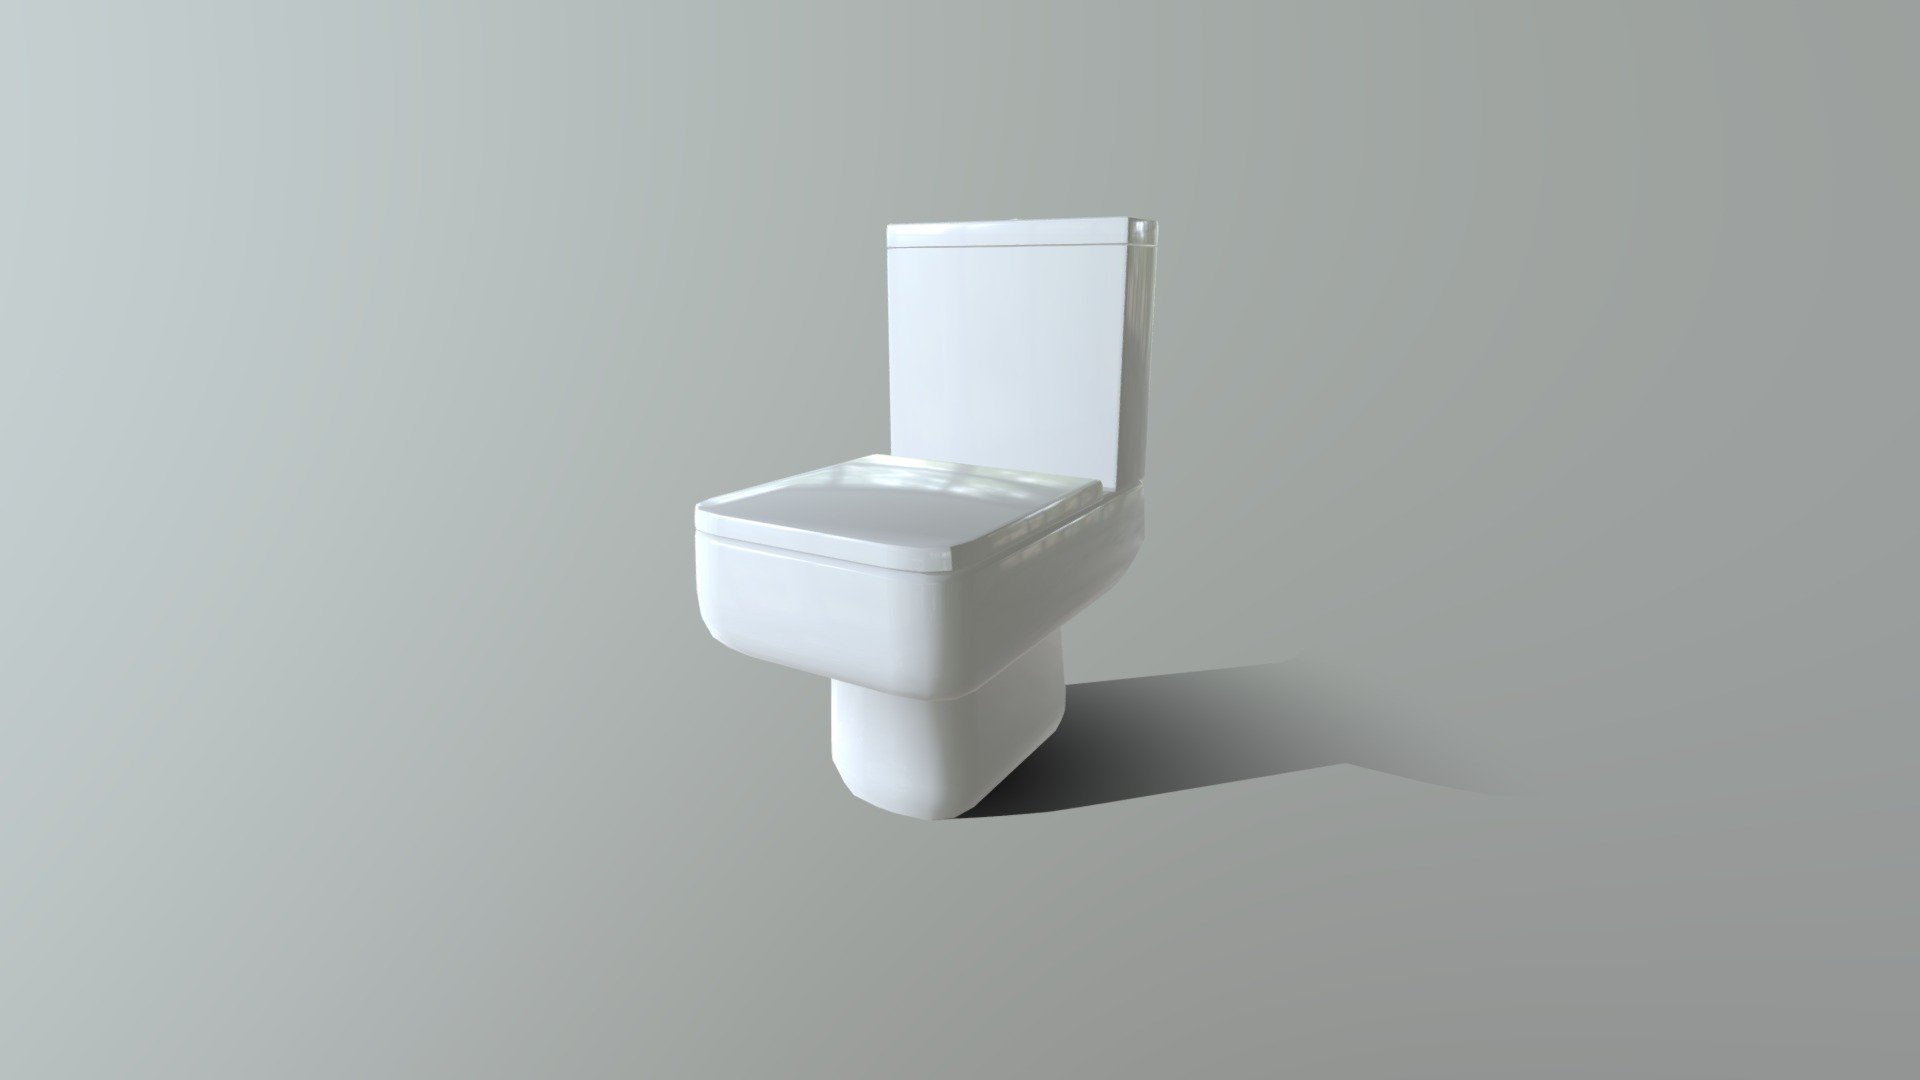 Modeled for RE4L - Real Estate for All. 08/2018

STYLE: Scandinavian

MODEL: Toilet 01

SOFTWARE: 3ds Max 2017

DESIGNER: Lucas Bender

SUPPORT: Ruan Sampaio

All rights reserved to Visual Media Content - visualmediacontent.com - Toilet S1M1 - Buy Royalty Free 3D model by Visual Media Content (@vmc) 3d model